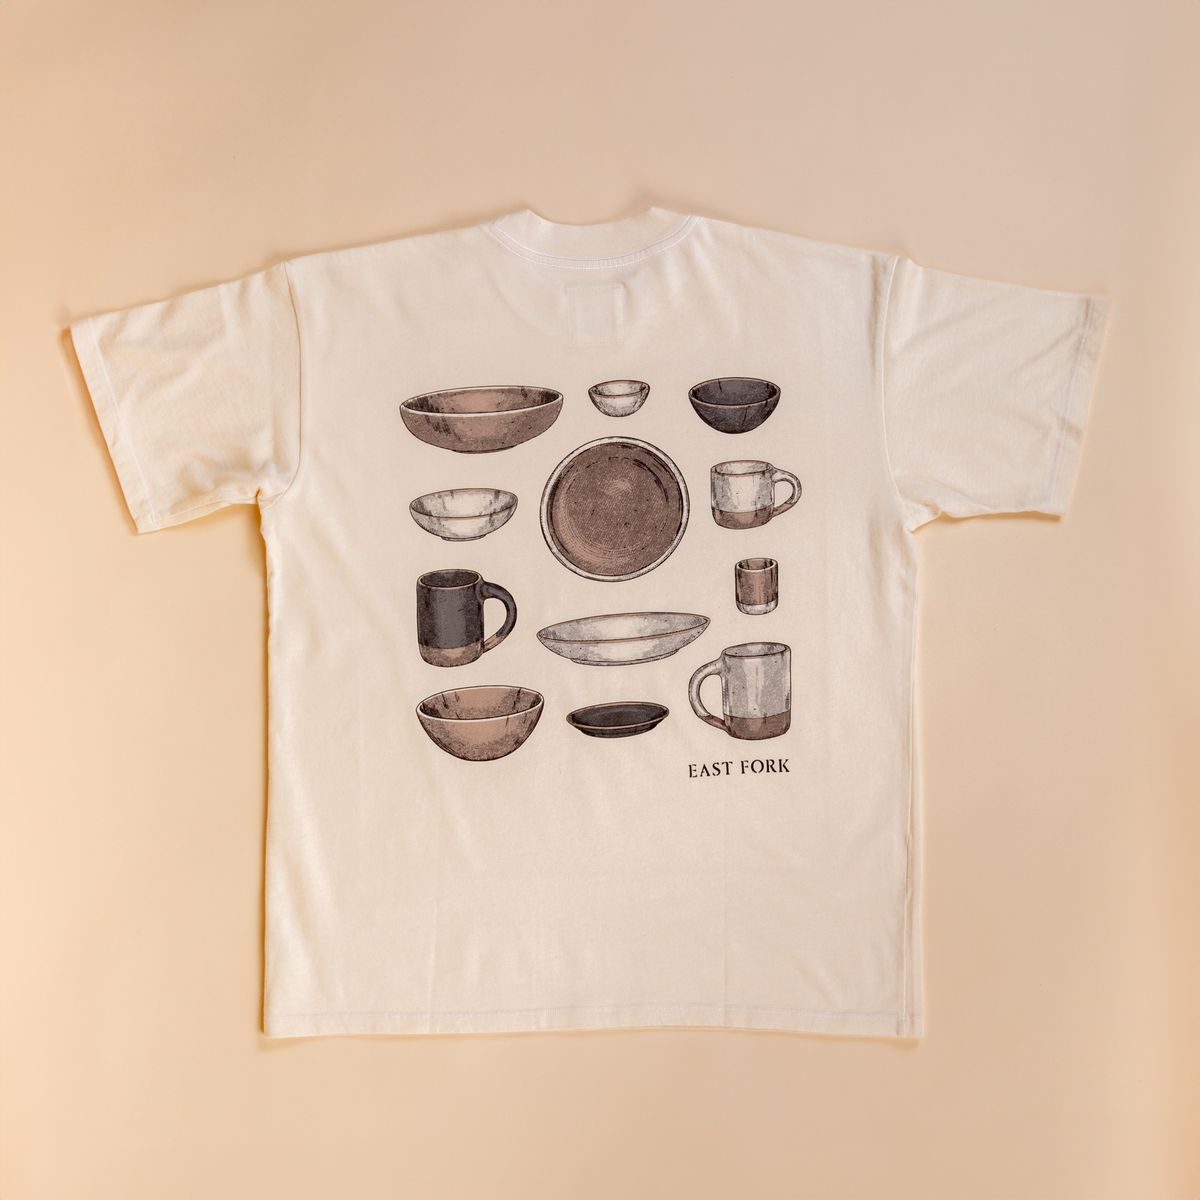 Flat lay of the back of a t-shirt in cream against a cream background. The back has an illustration of various mugs, plates, and bowls all in neutral colors.